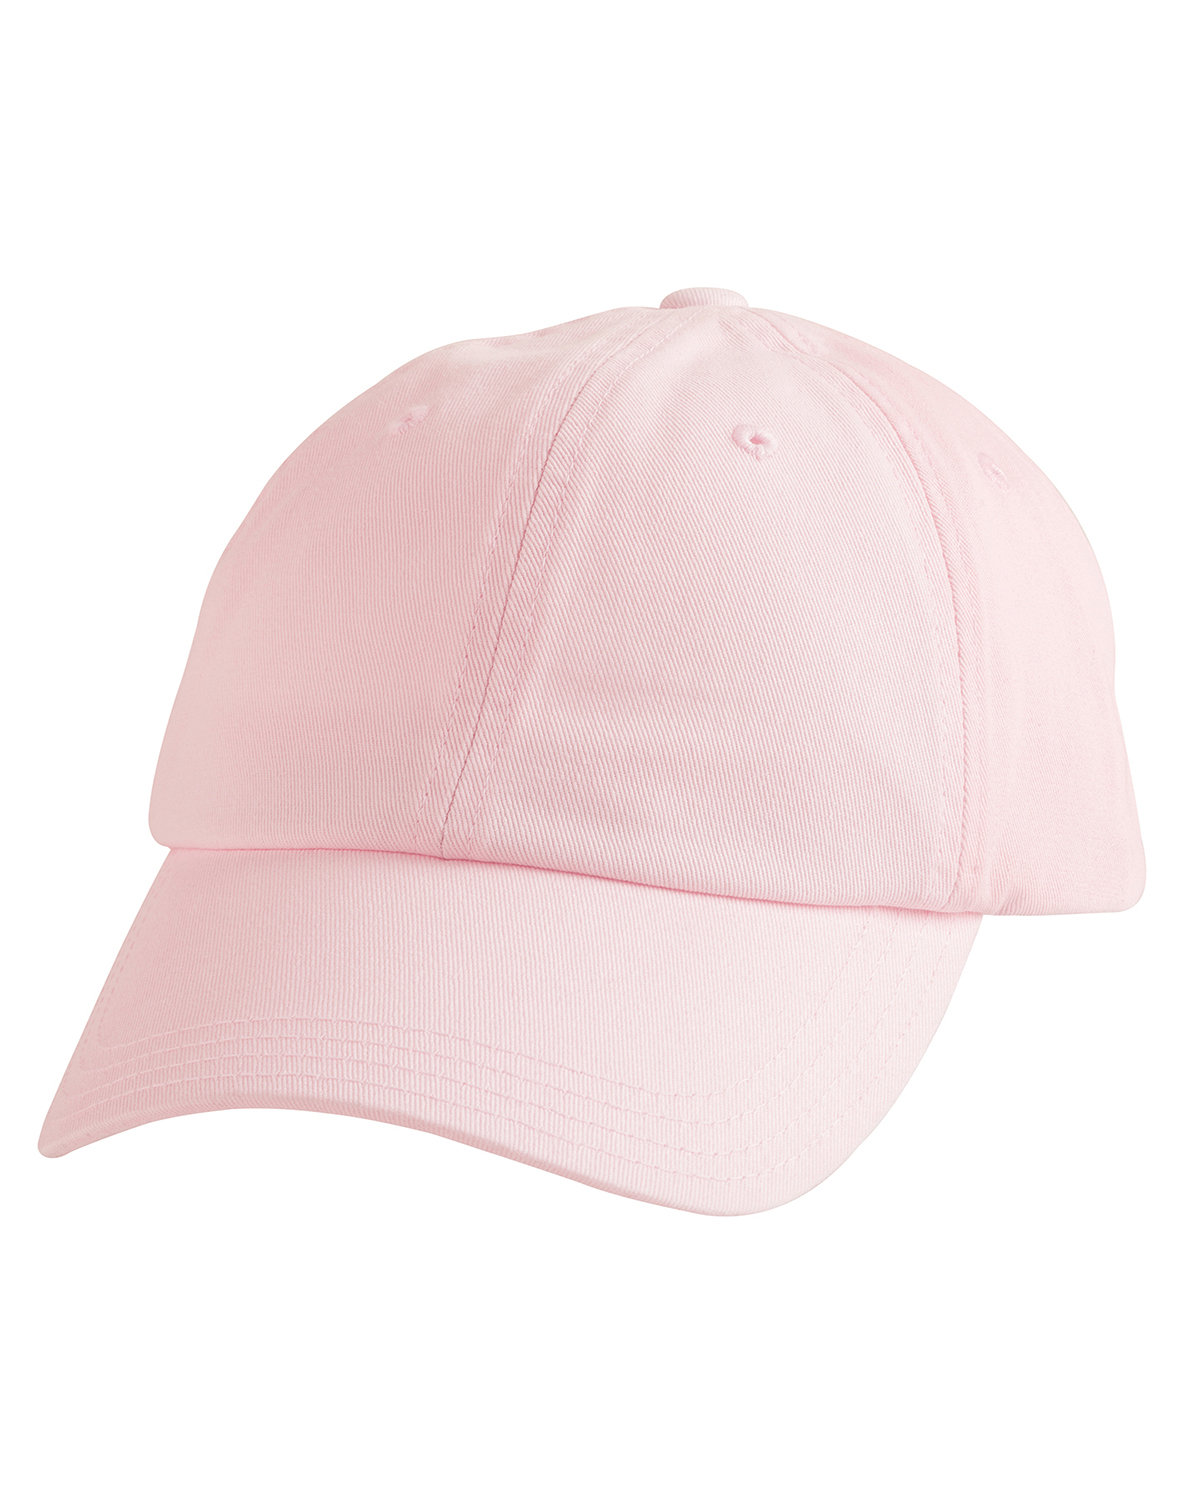 click to view CHALK PINK